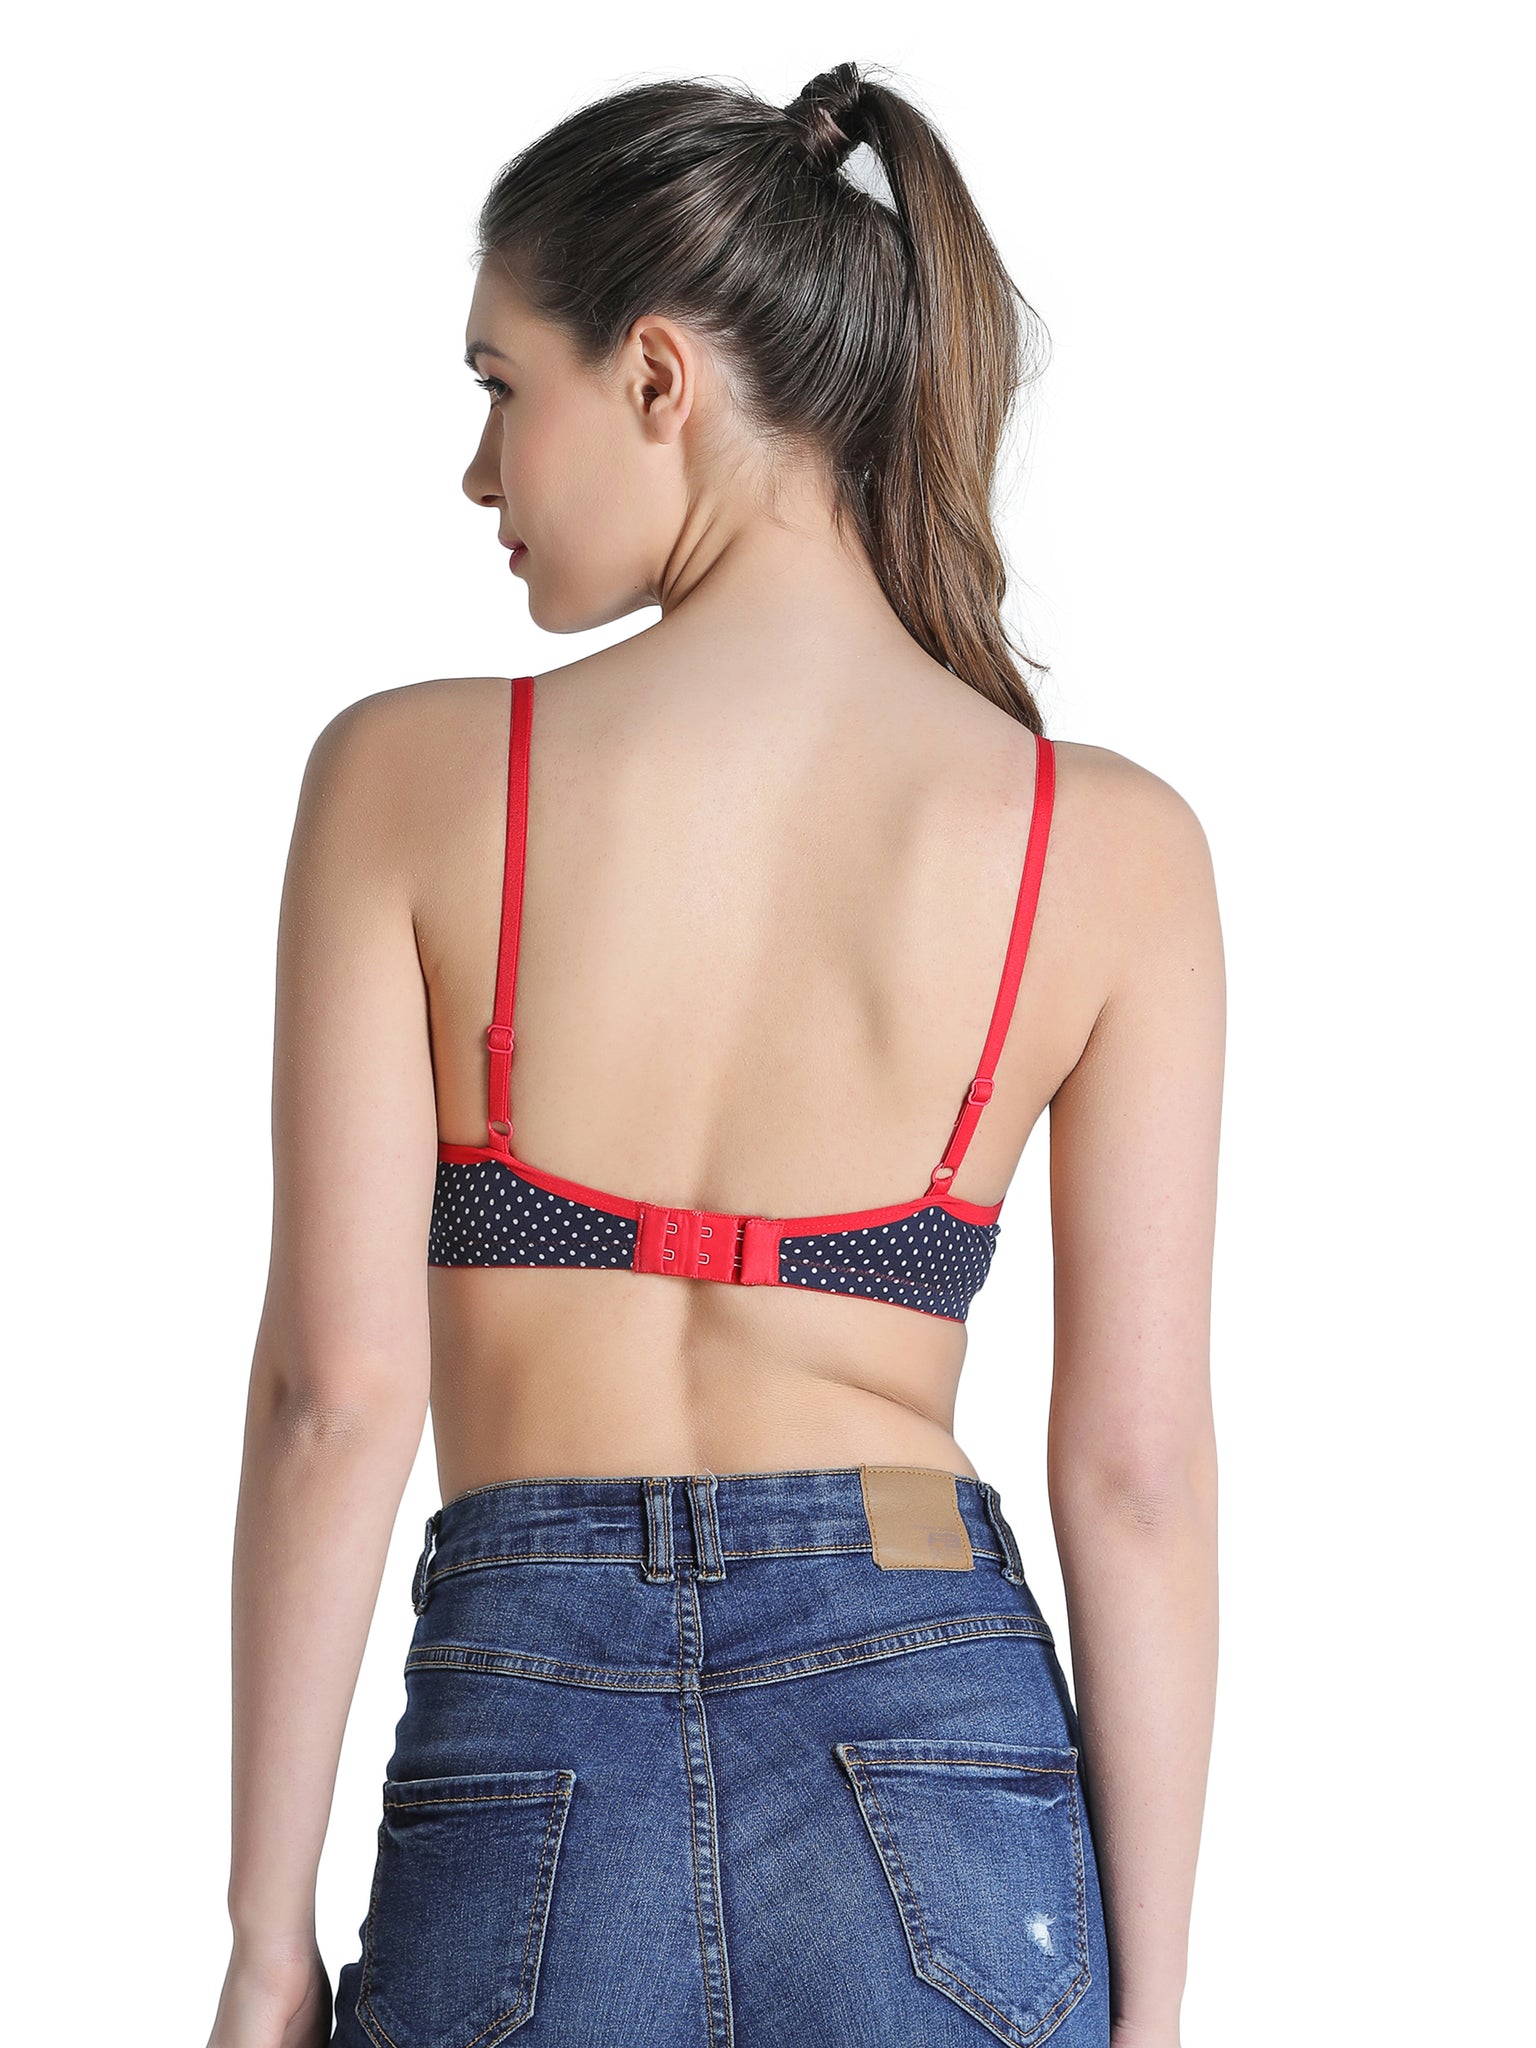 Deevaz Combo of 2 Non-Padded Cotton Rich cross back Sports Bra In Hot-pink  & Blue.